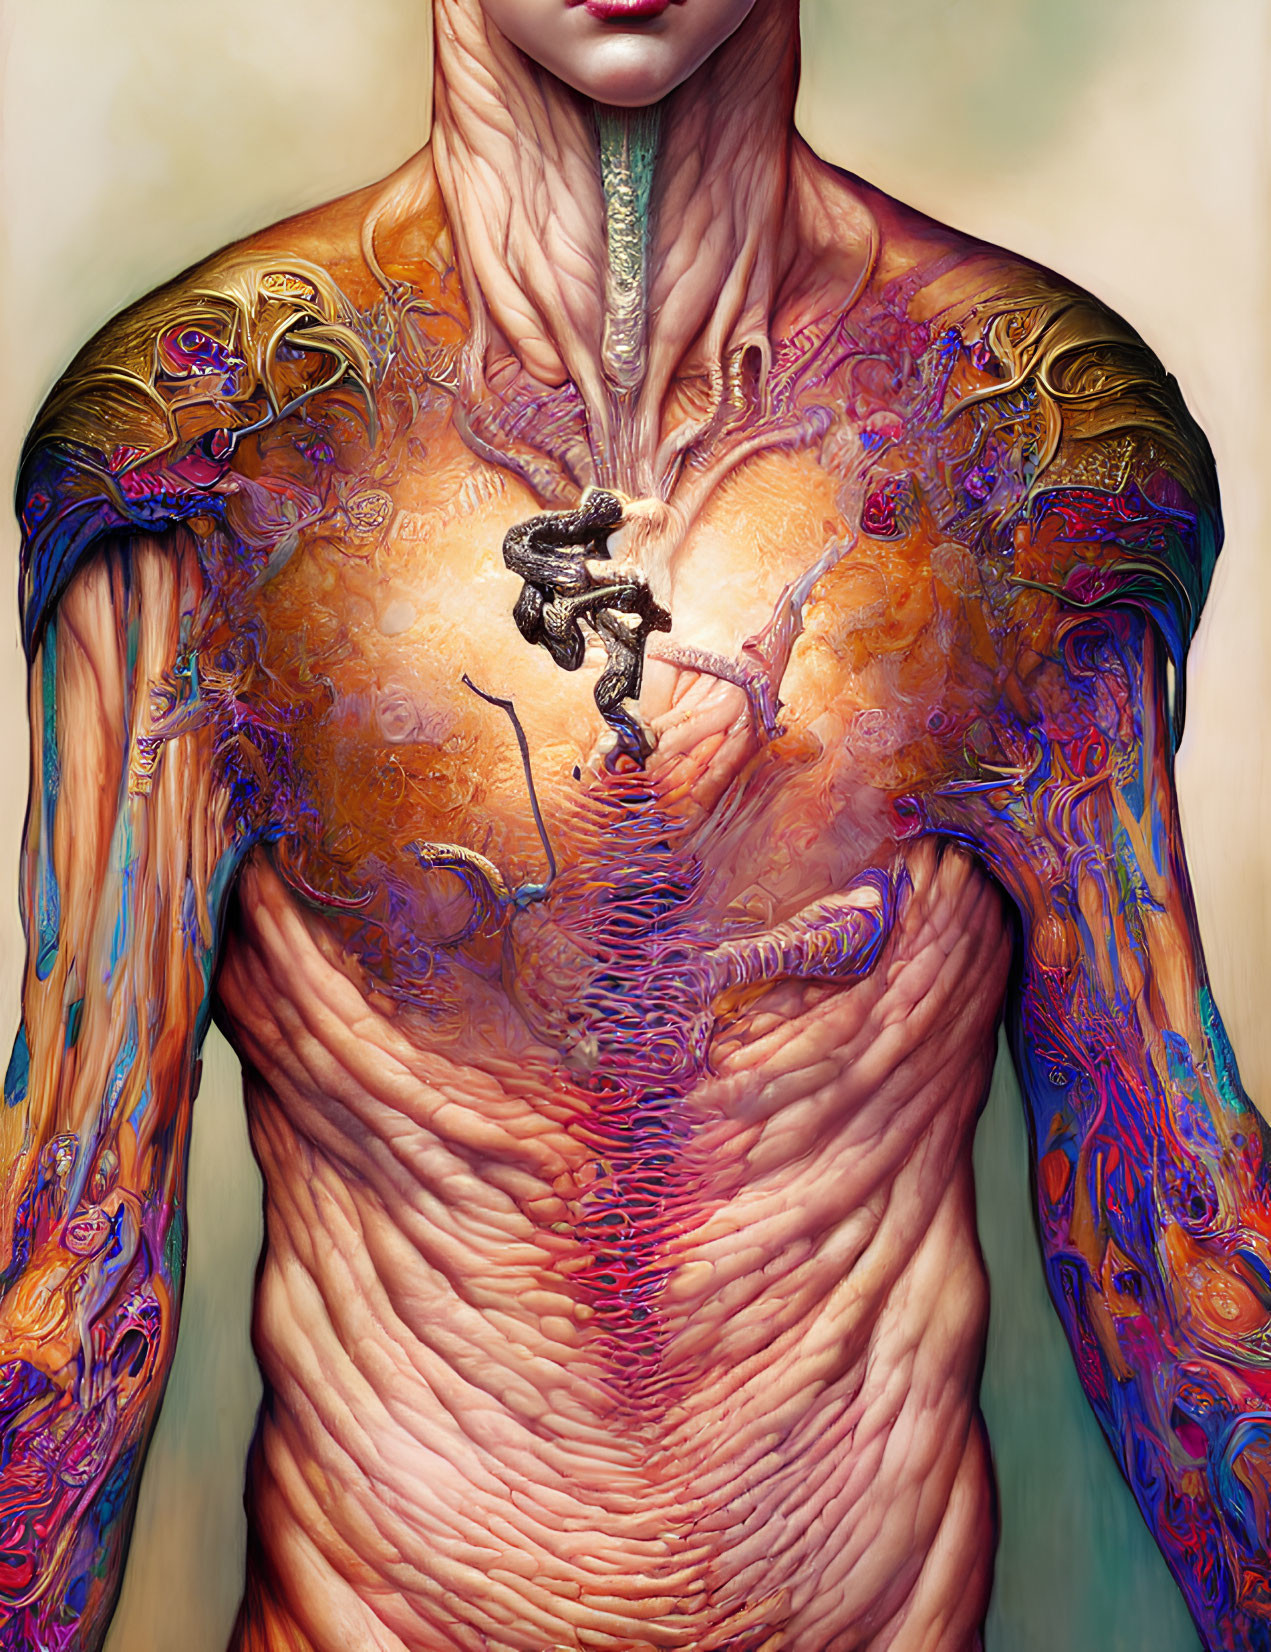 Colorful Fantasy Illustration of Intricate Biological-Mechanical Body